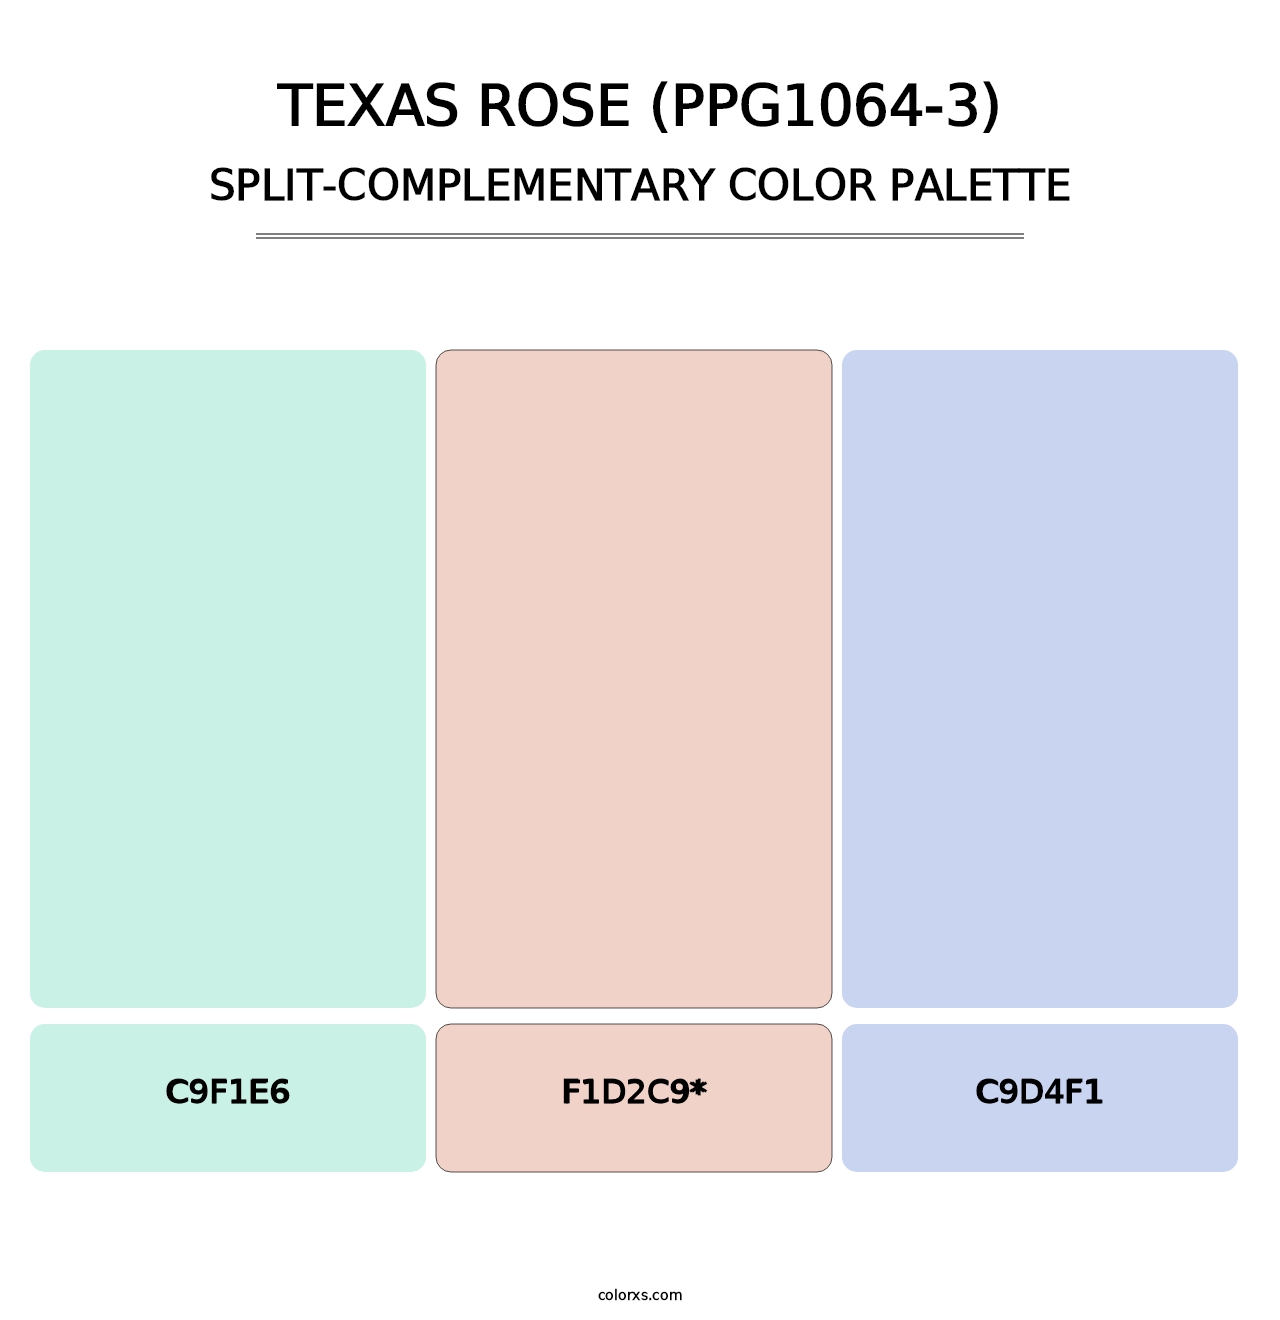 Texas Rose (PPG1064-3) - Split-Complementary Color Palette